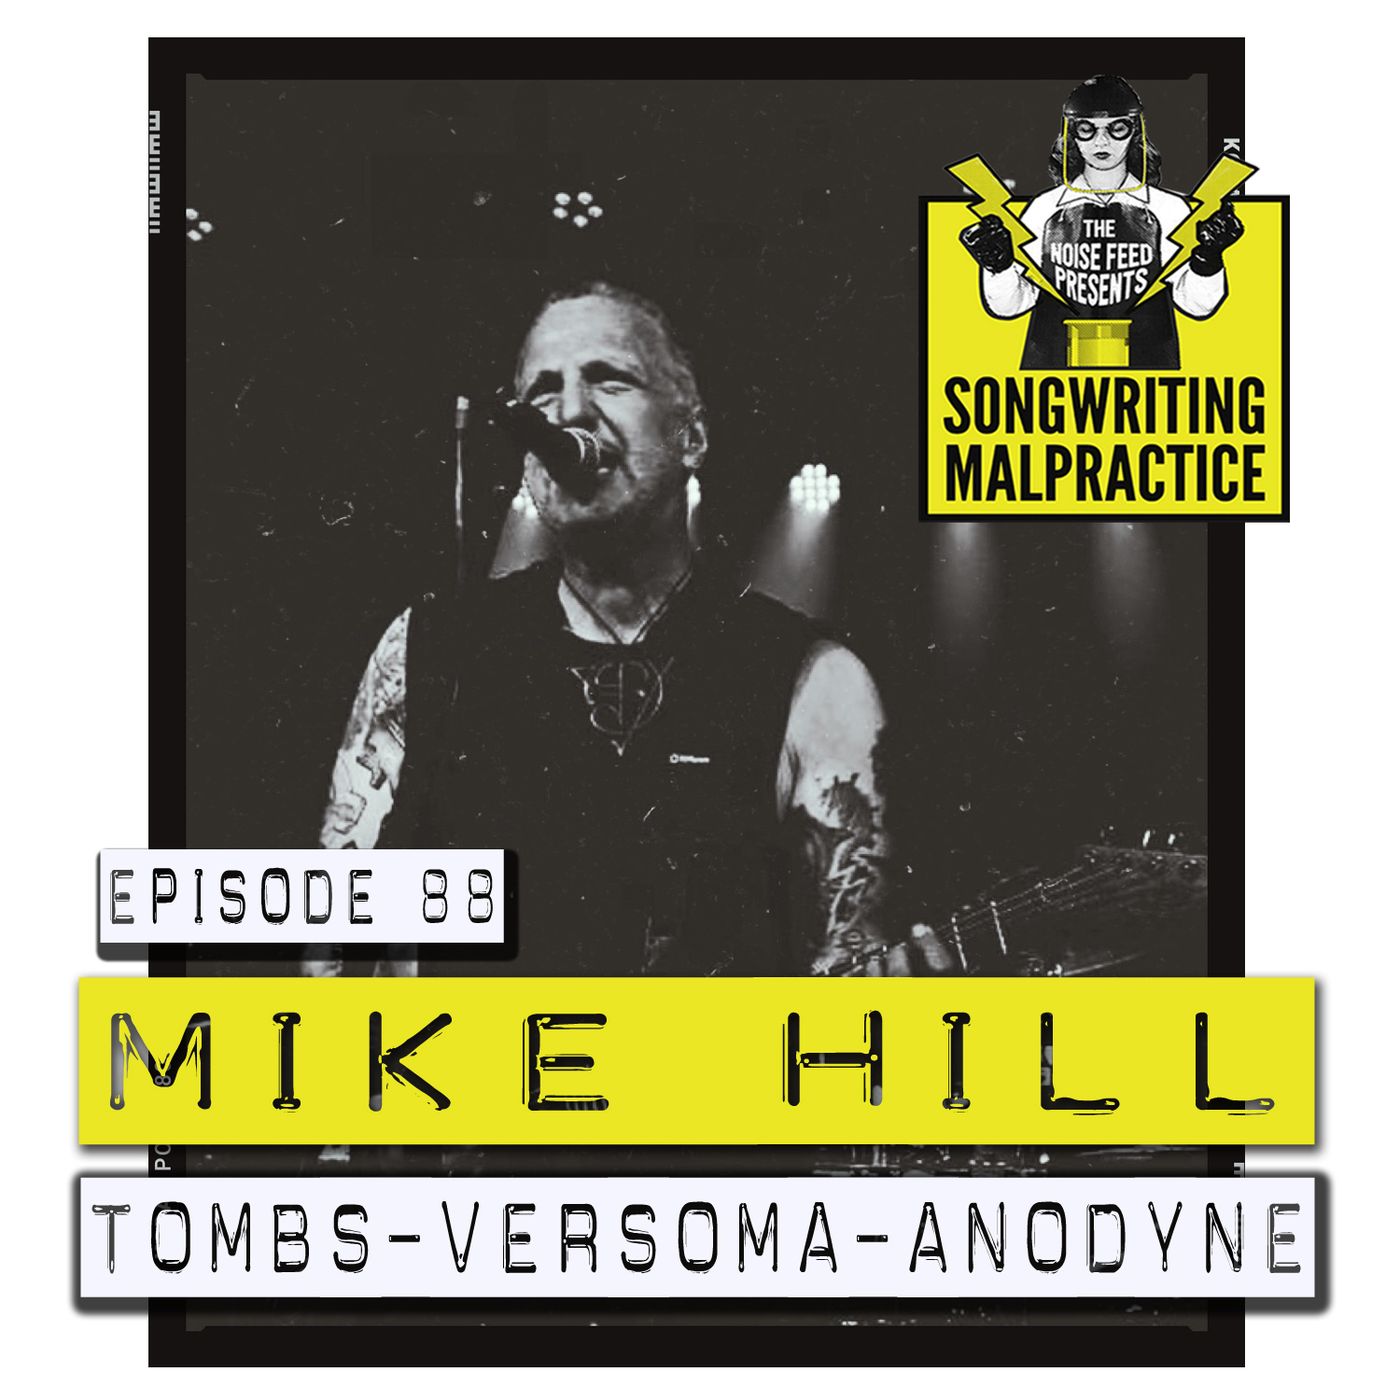 EP #88 Mike Hill (Anodyne-Versoma-Tombs)